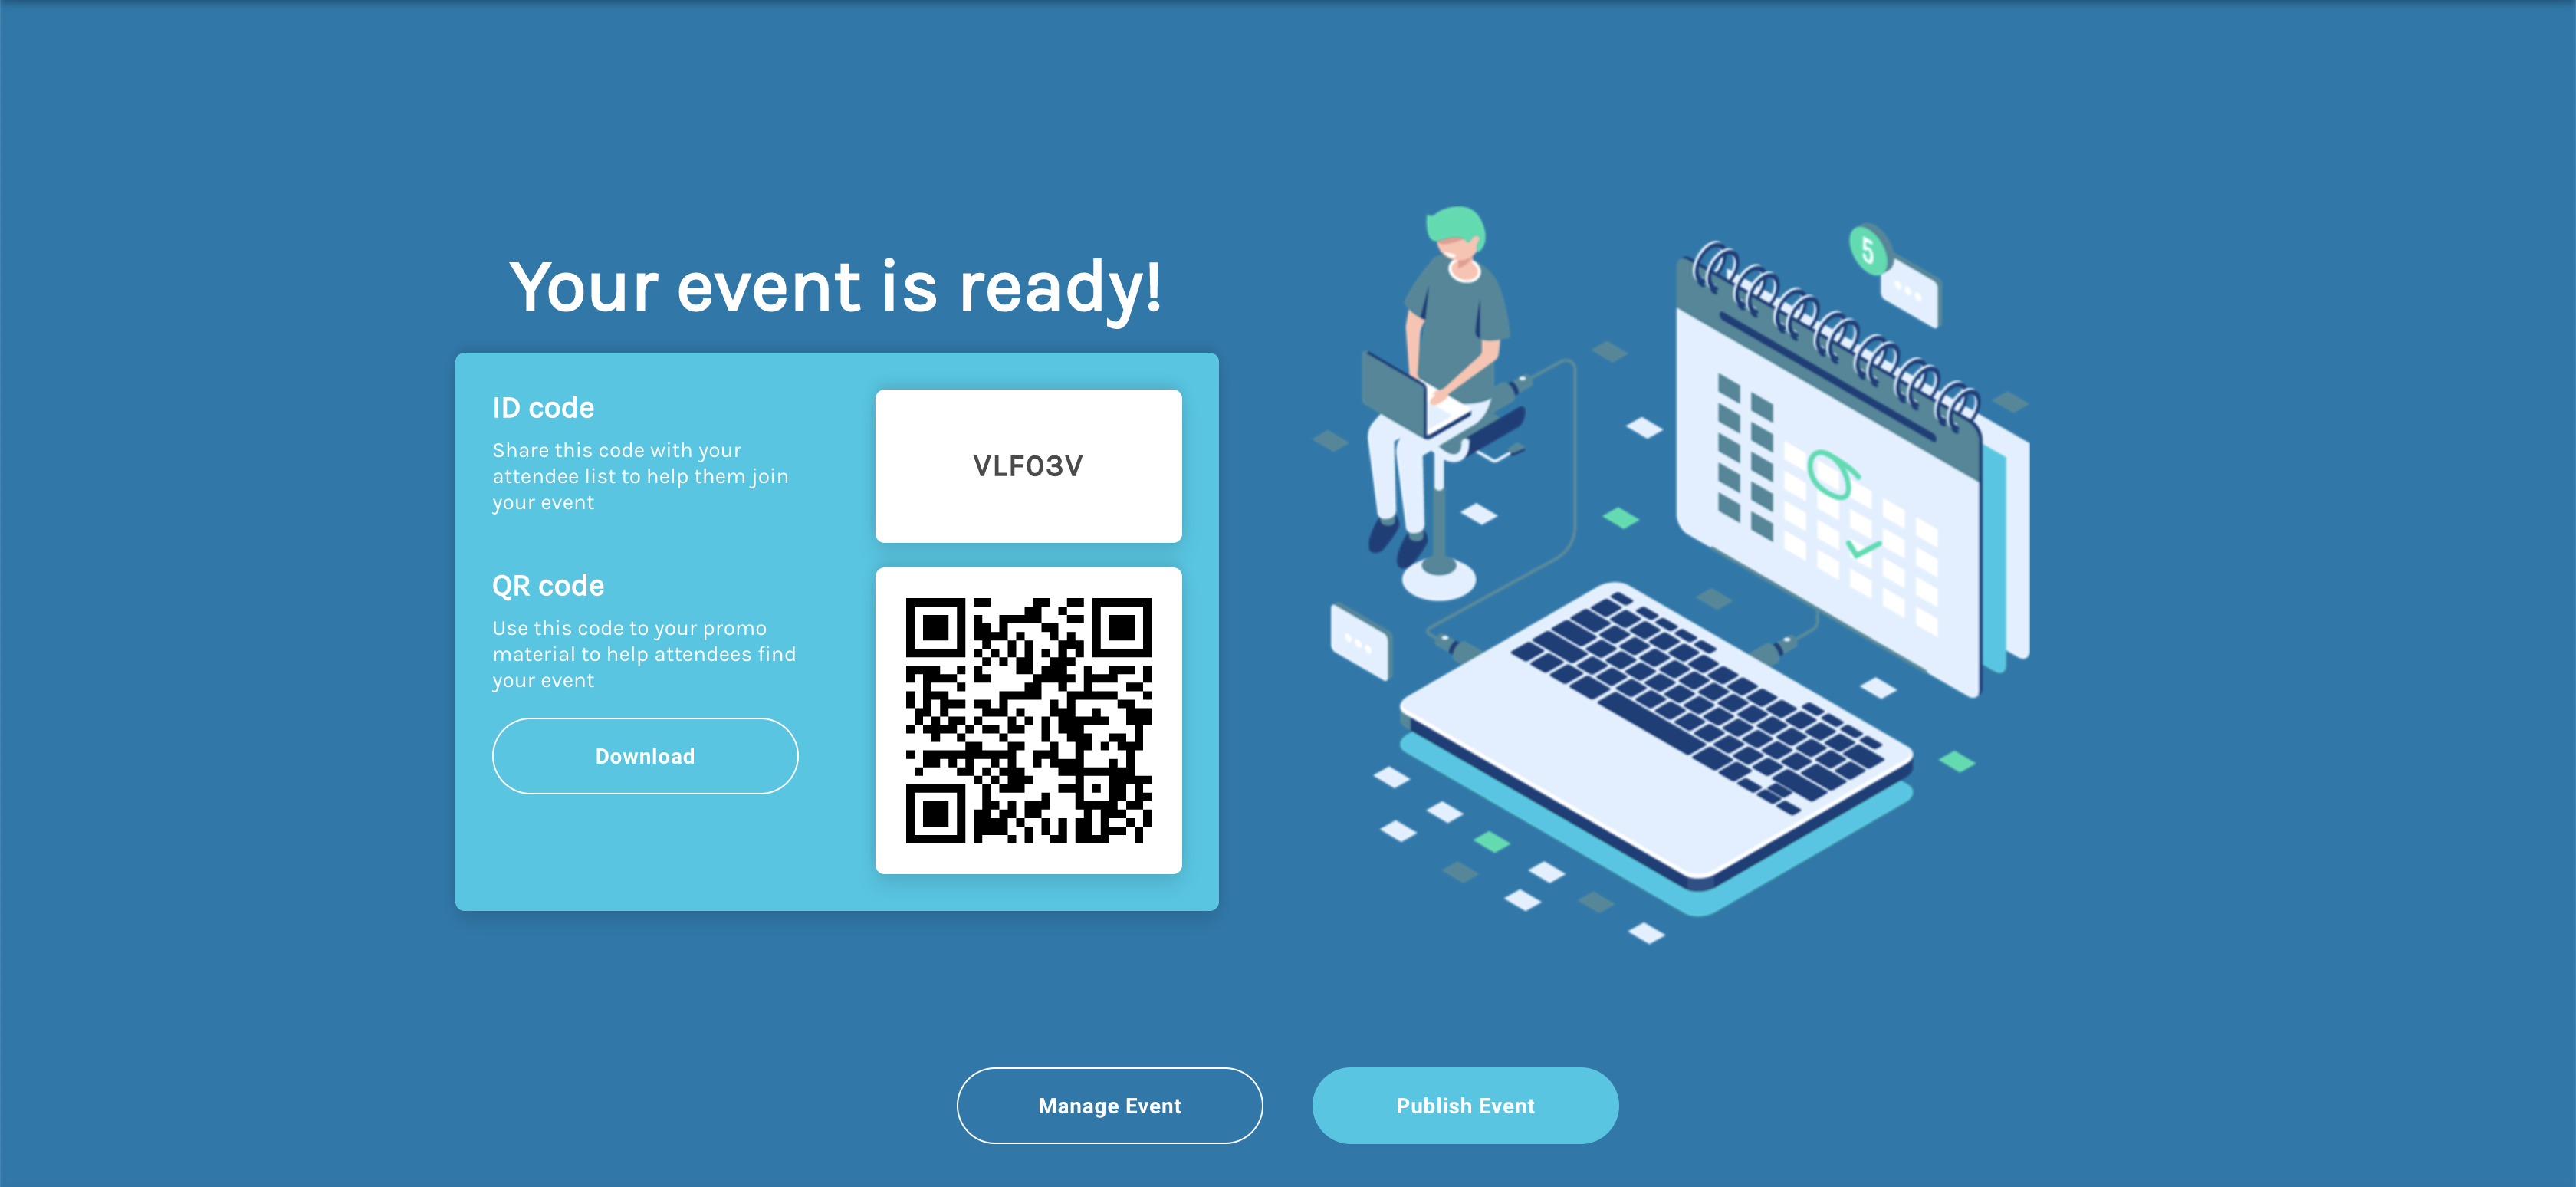 create-event-step-8.png